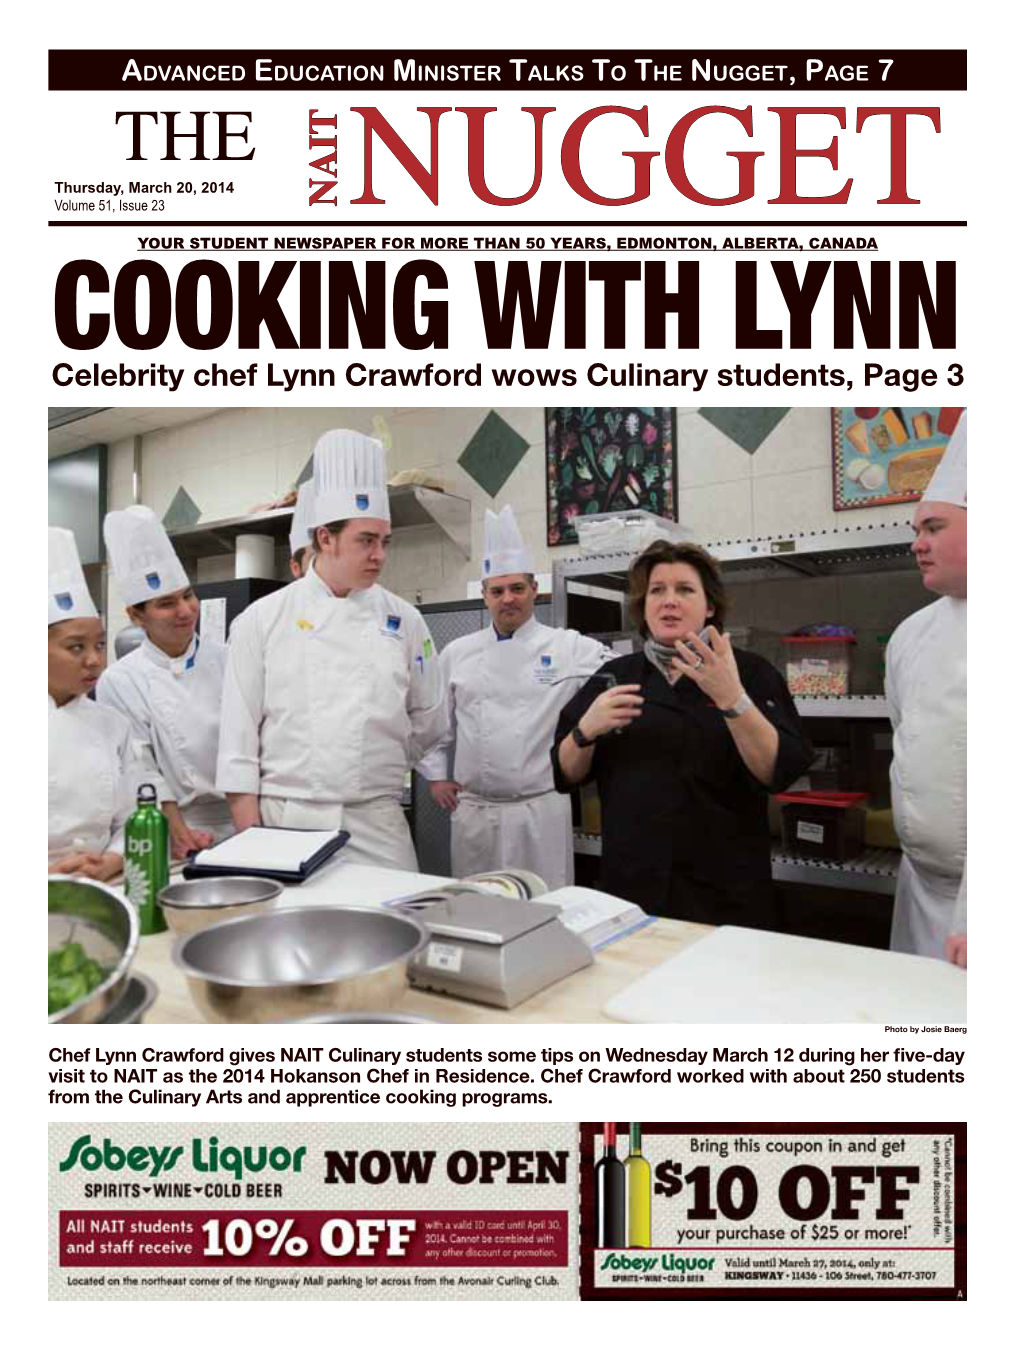 Celebrity Chef Lynn Crawford Wows Culinary Students, Page 3